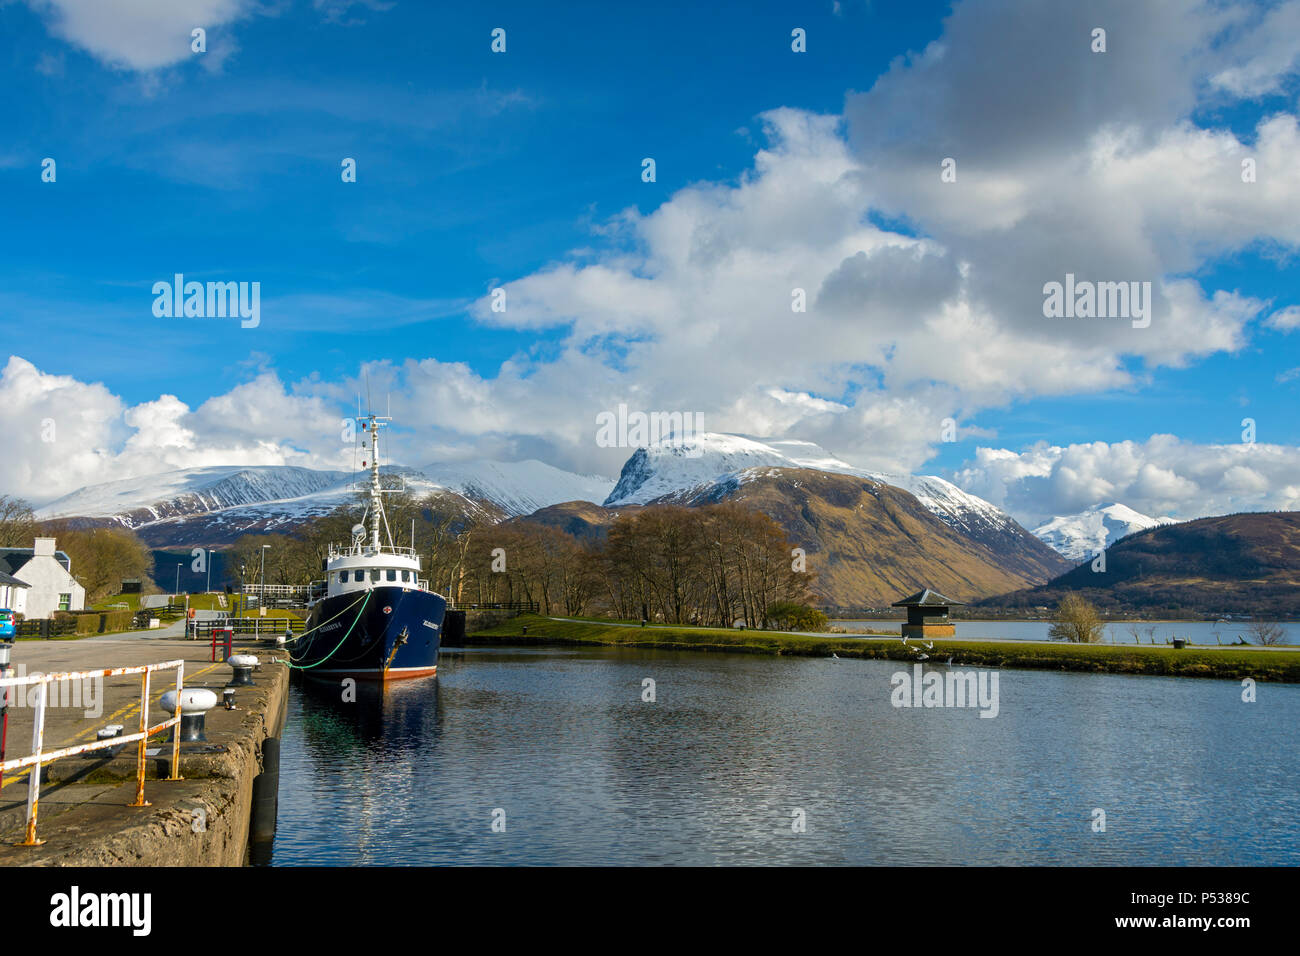 Ben Nevis from the Caledonian Canal at Corpach near Fort William, Highland Region, Scotland, UK.  The boat is the Elizabeth G. Stock Photo